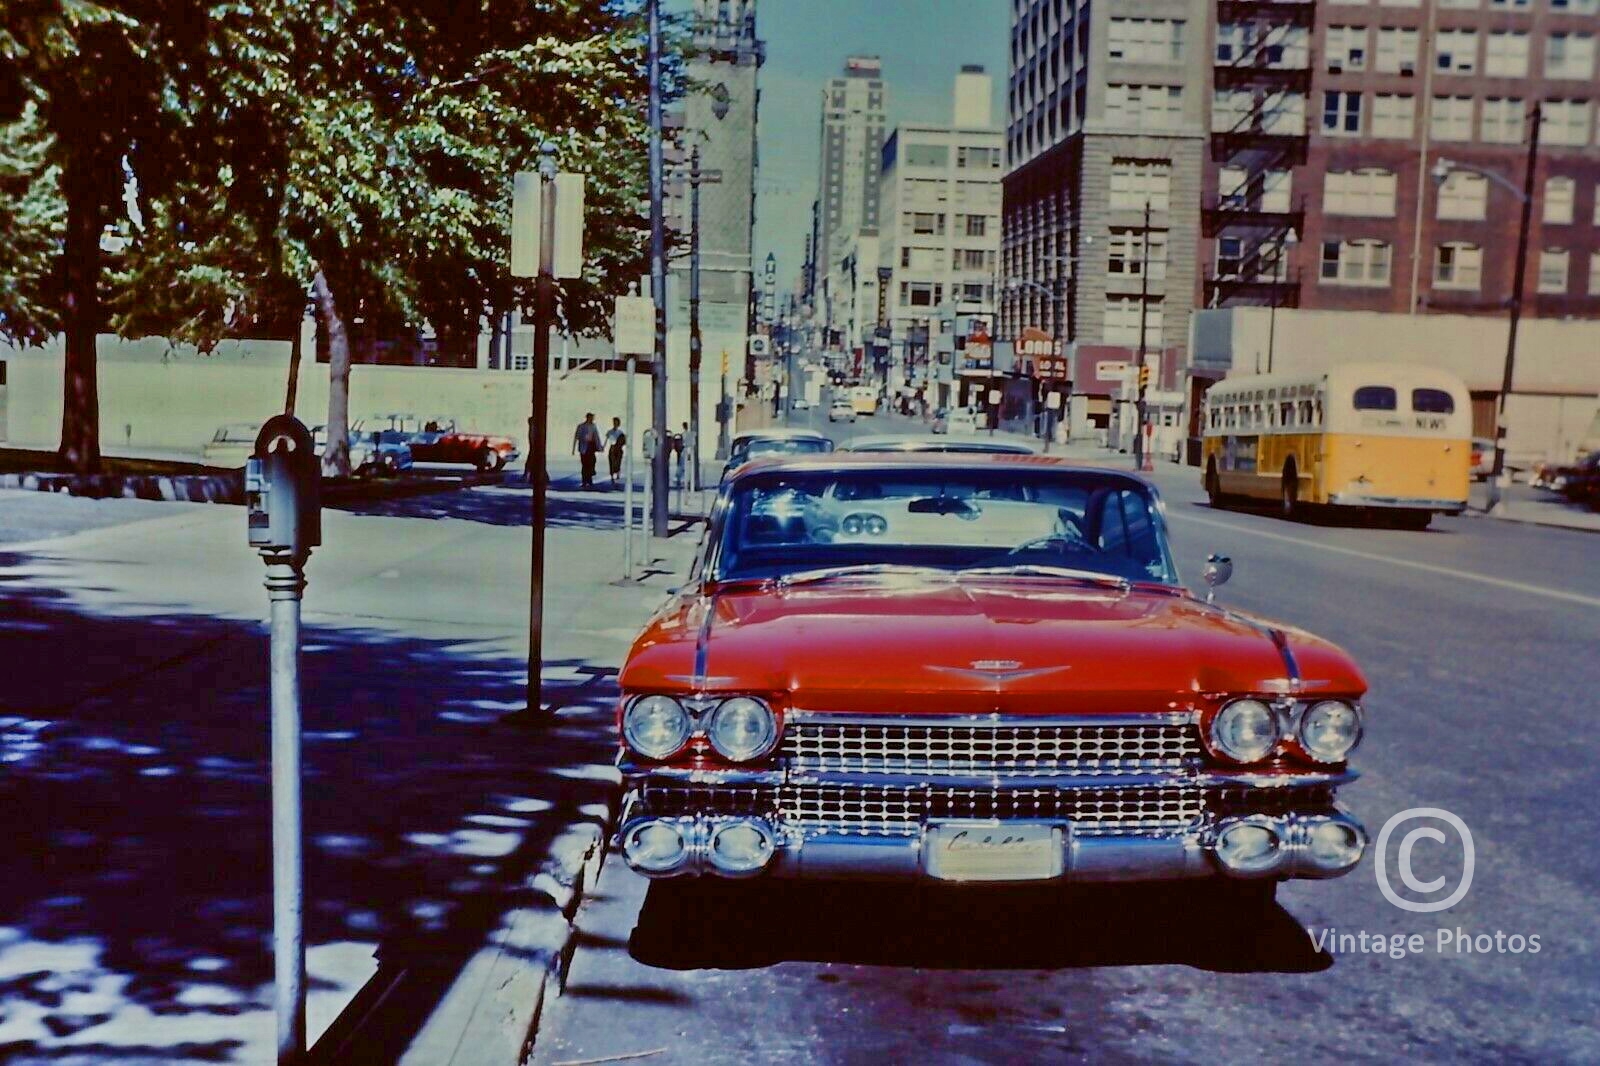 1959 Classic Red American Car on Street